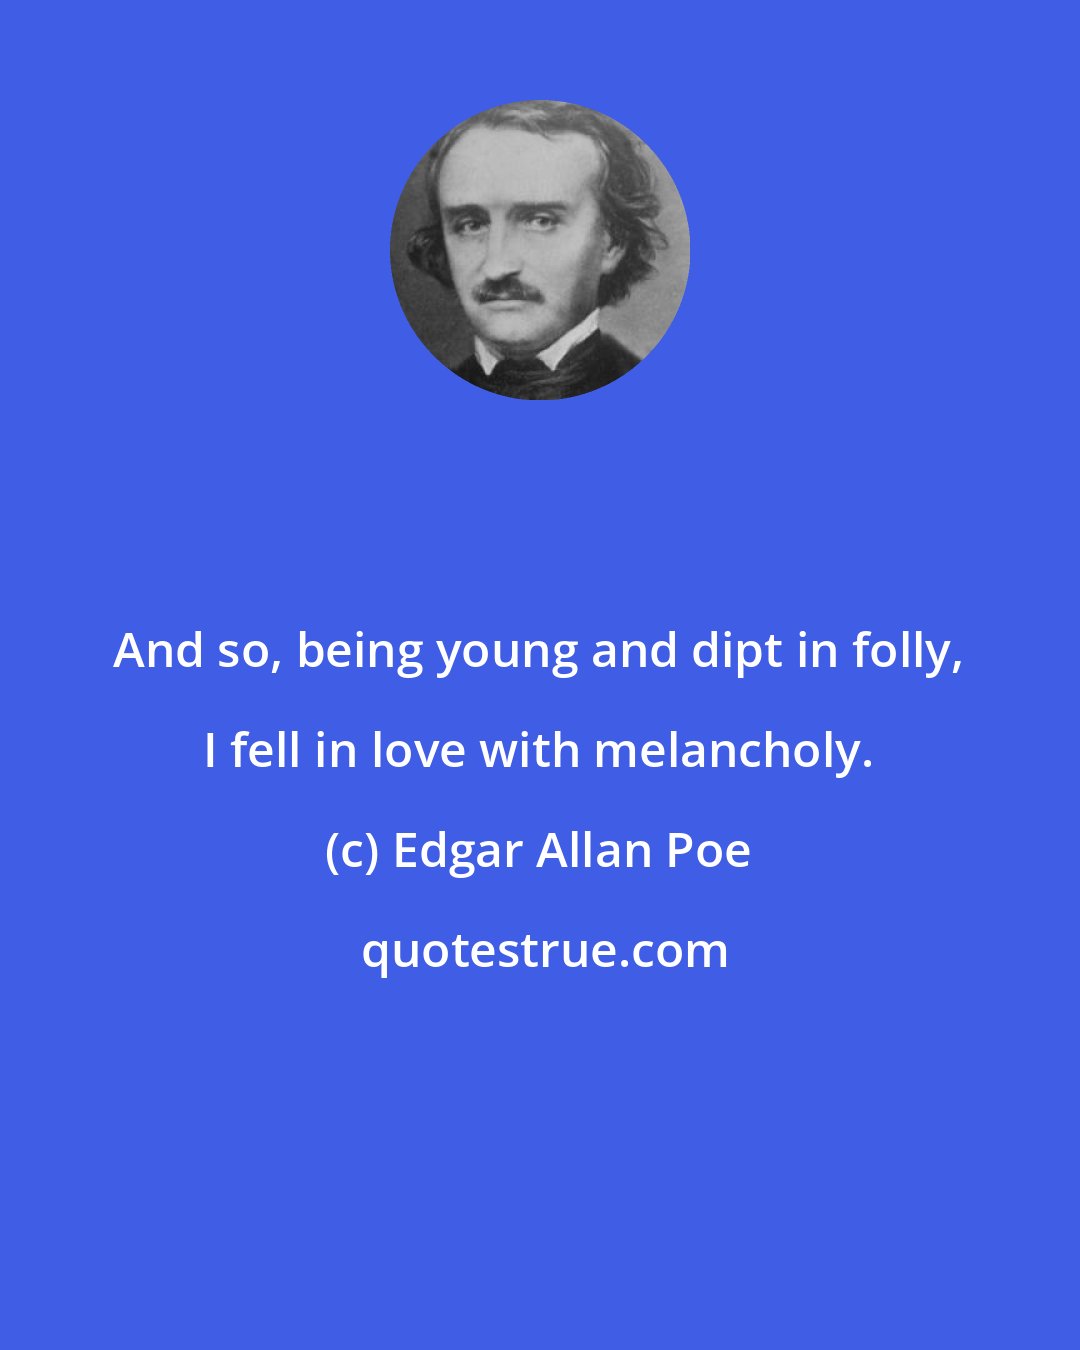 Edgar Allan Poe: And so, being young and dipt in folly, I fell in love with melancholy.